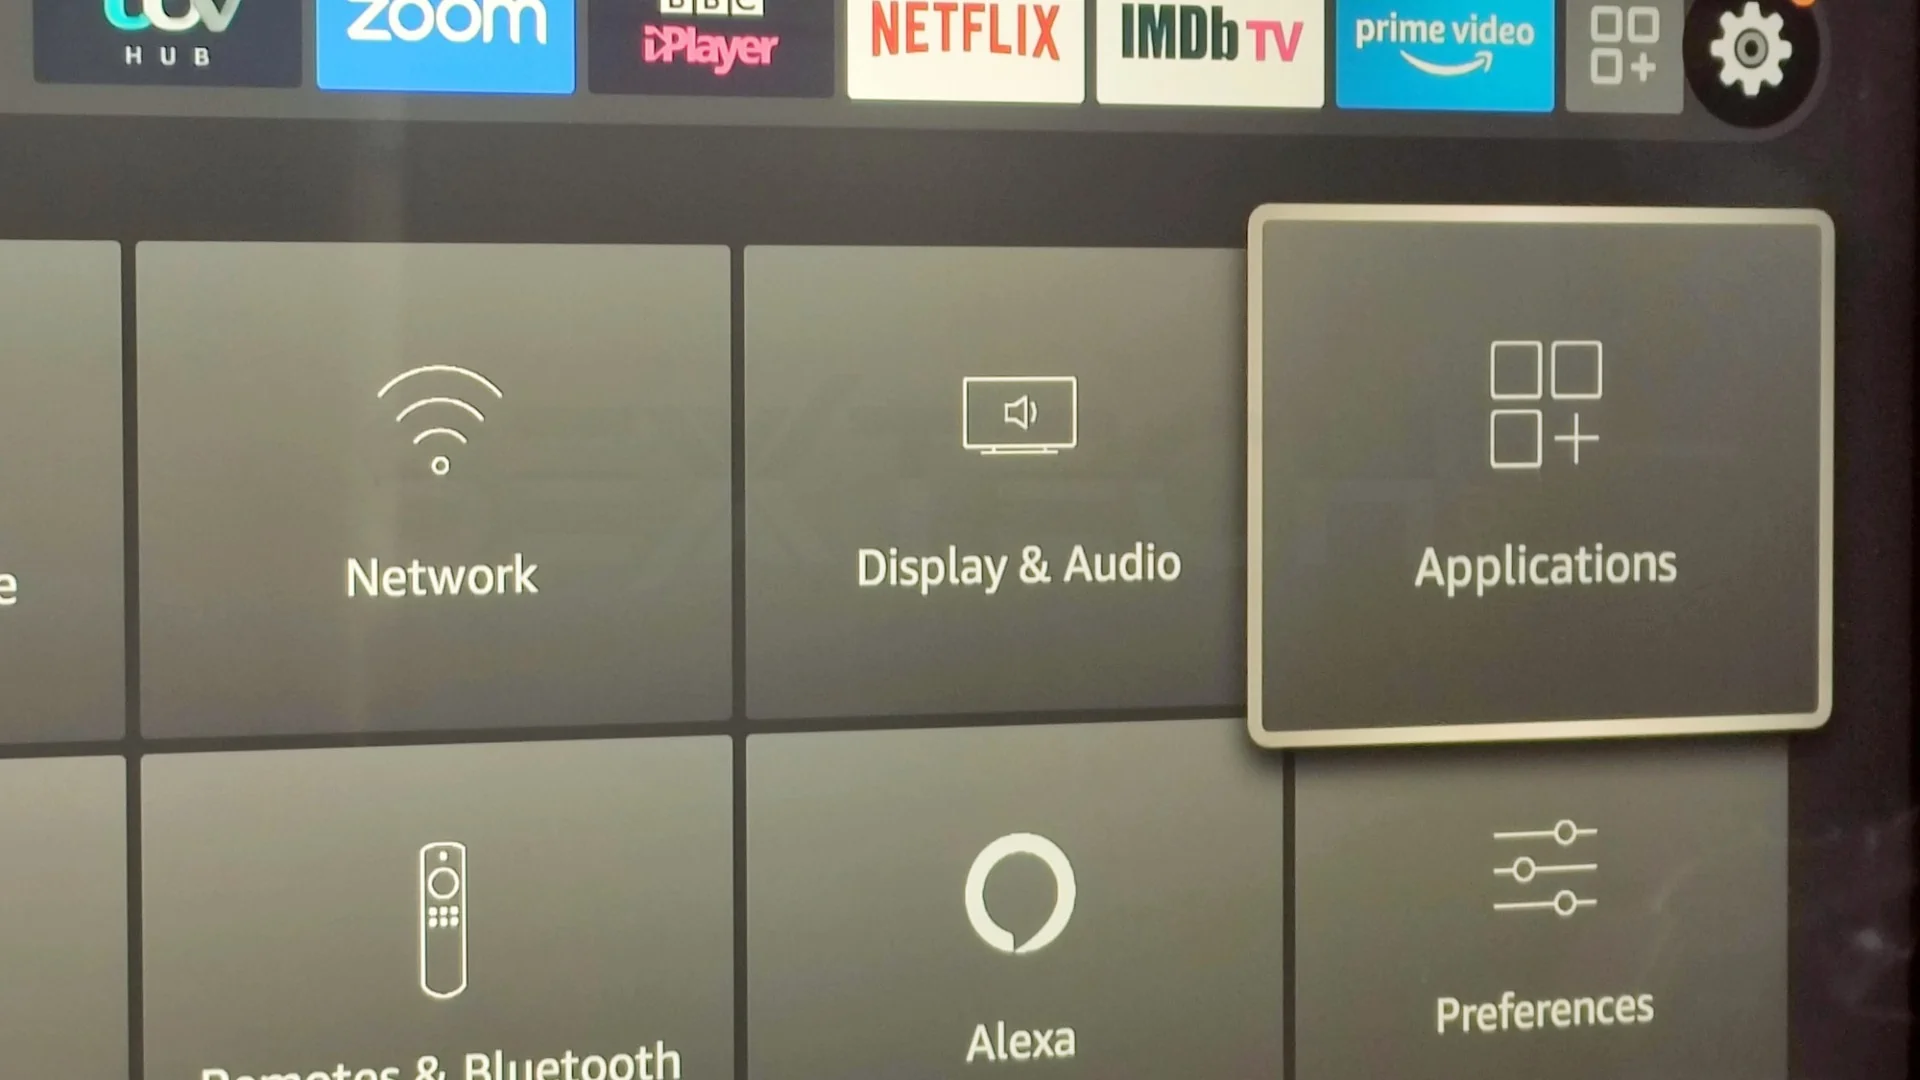 How to sideload apps on Amazon Fire devices.